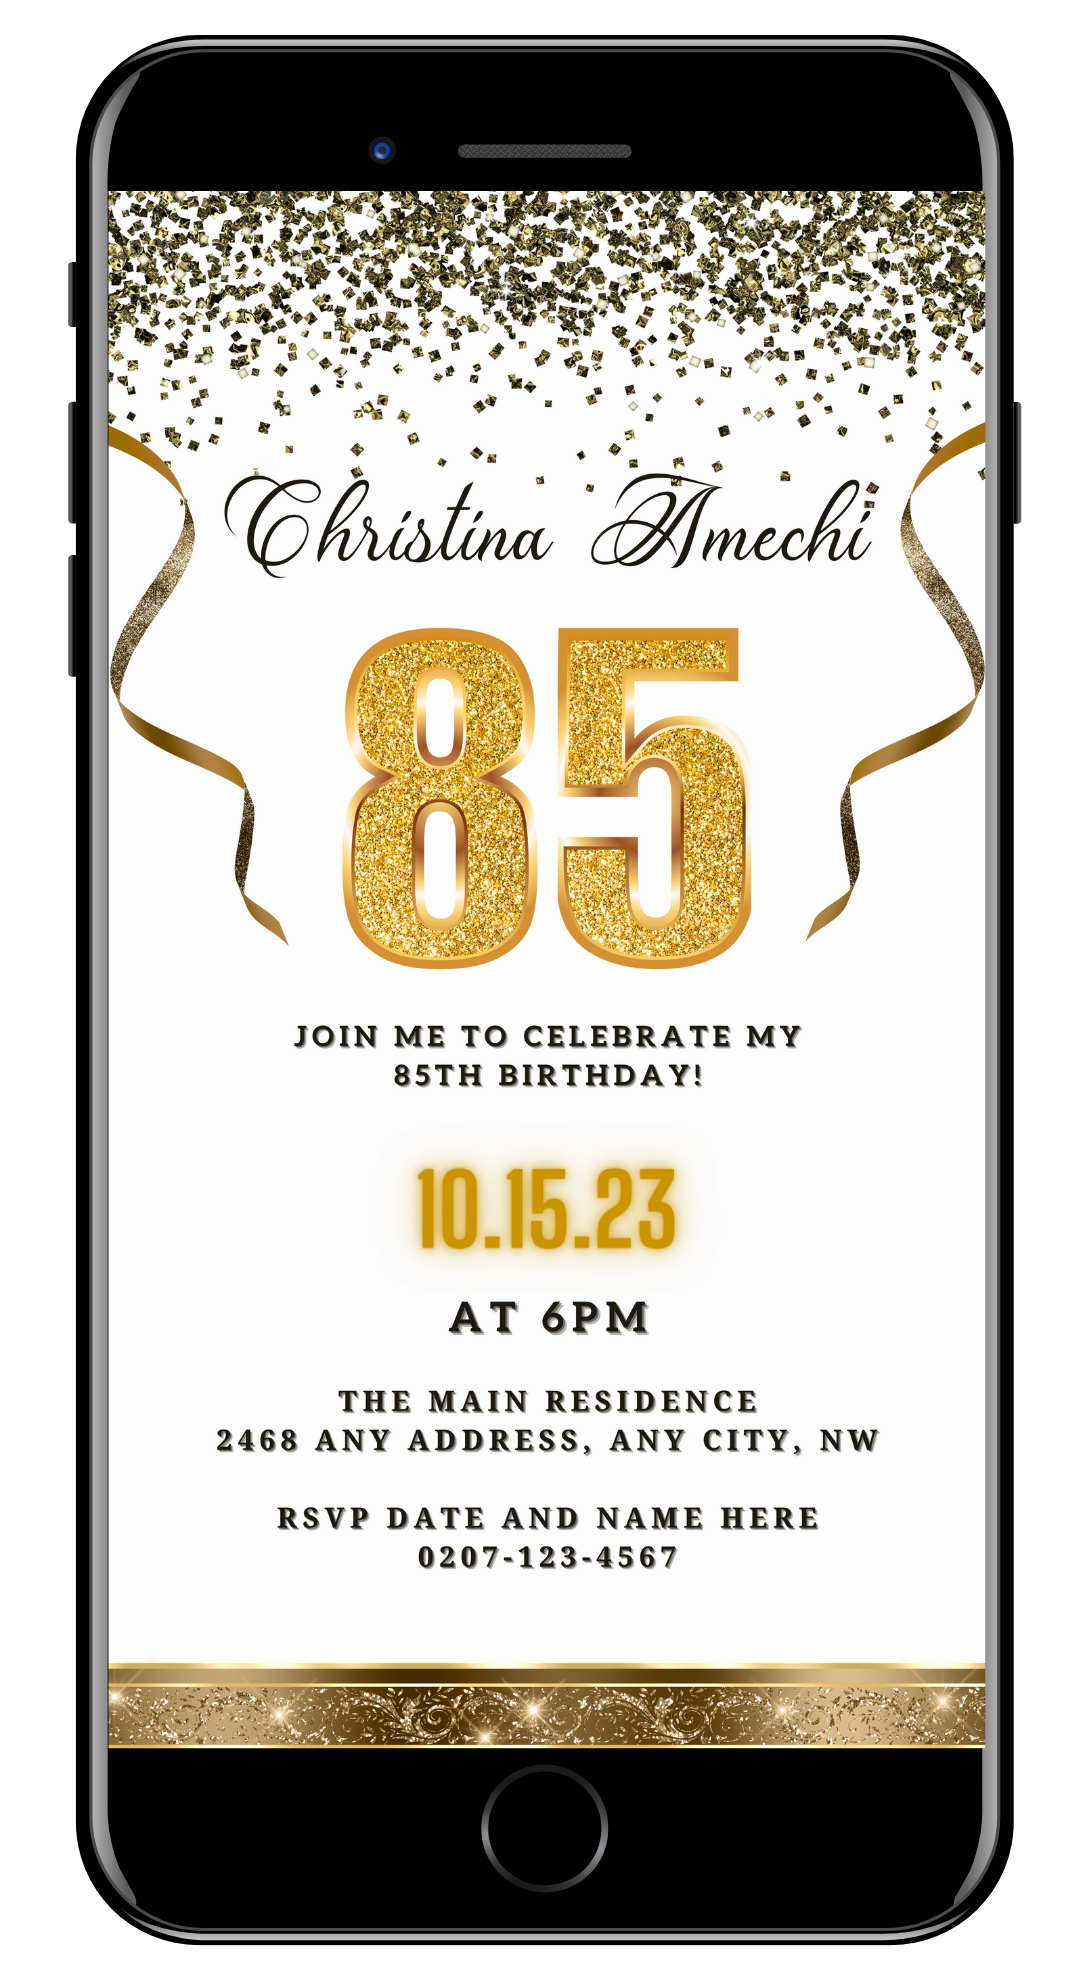 Customizable Digital White Gold Confetti 85th Birthday Evite displayed on a smartphone screen with gold text and decorative ribbons.